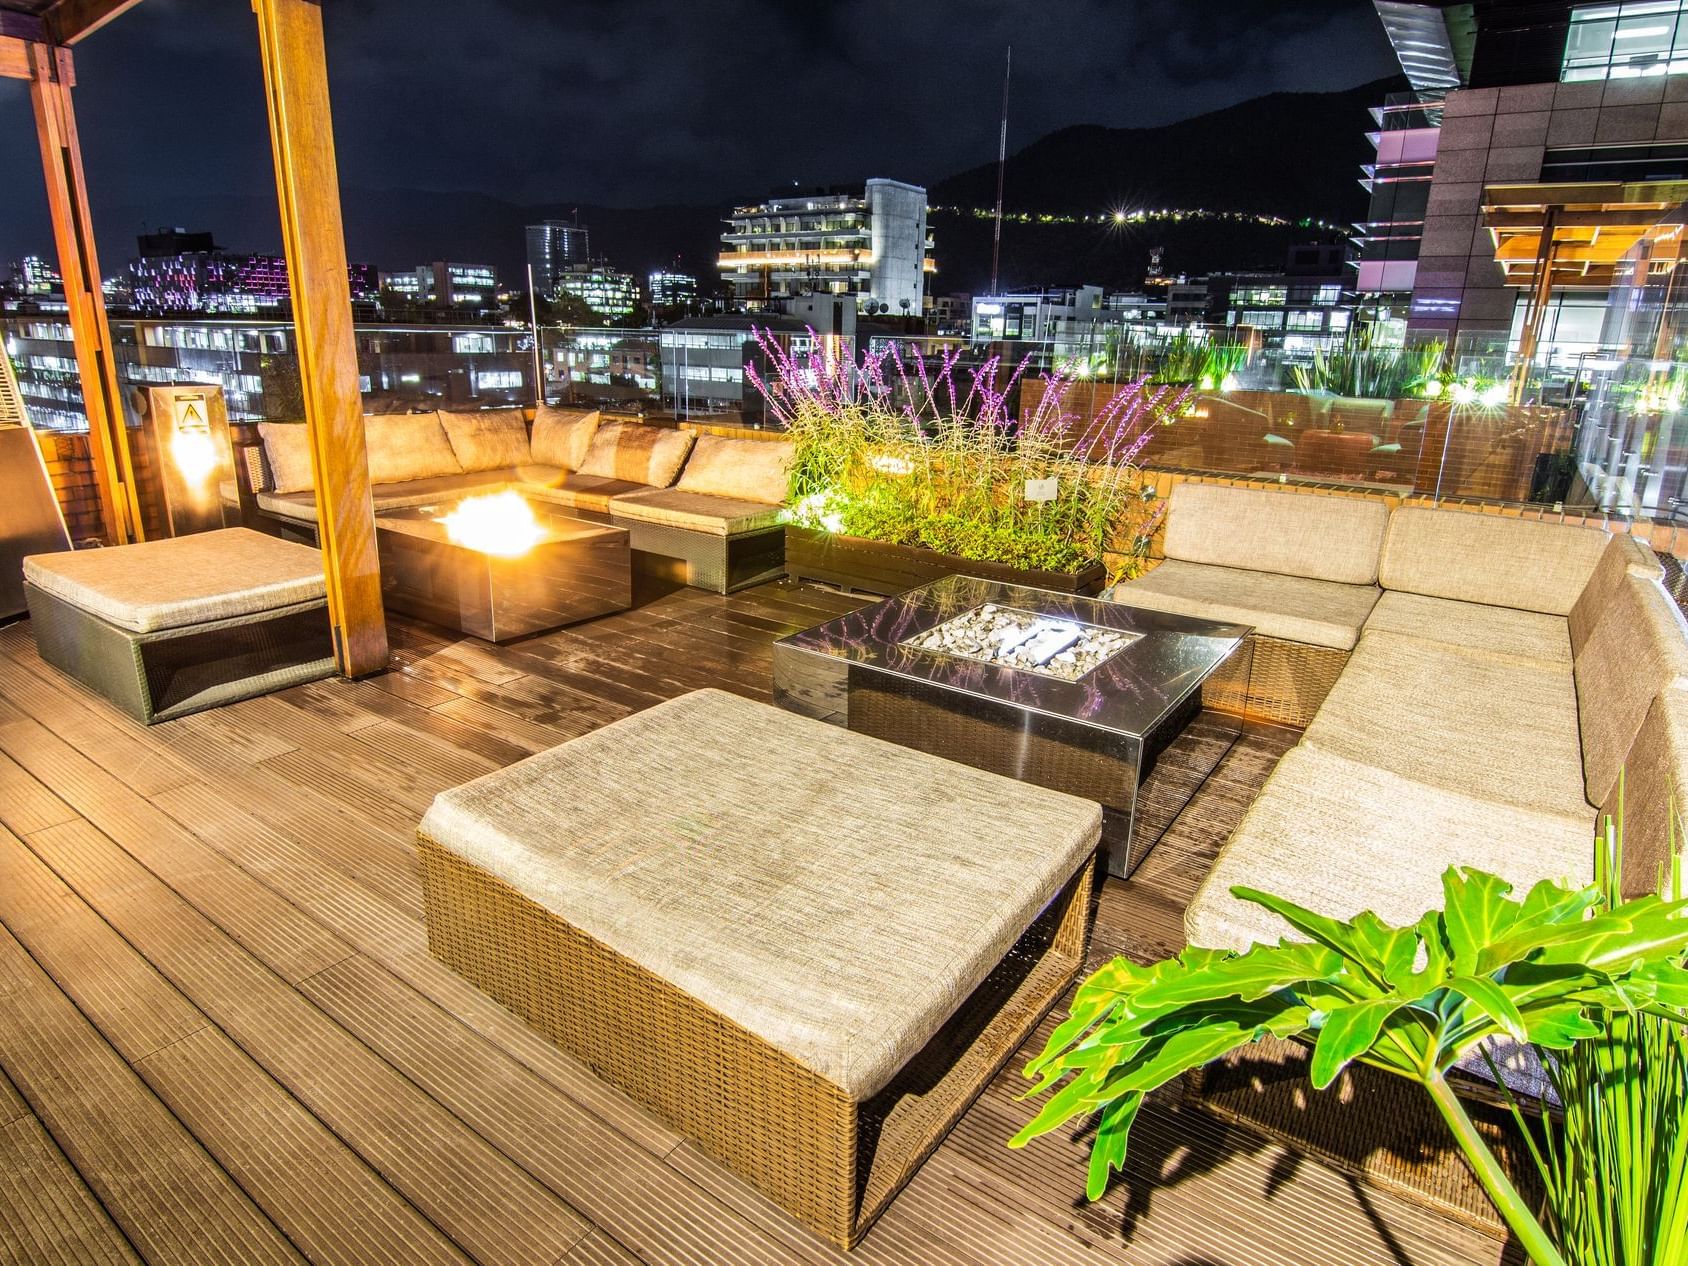 Night view of the outdoor chilling area at the rooftop with lights 